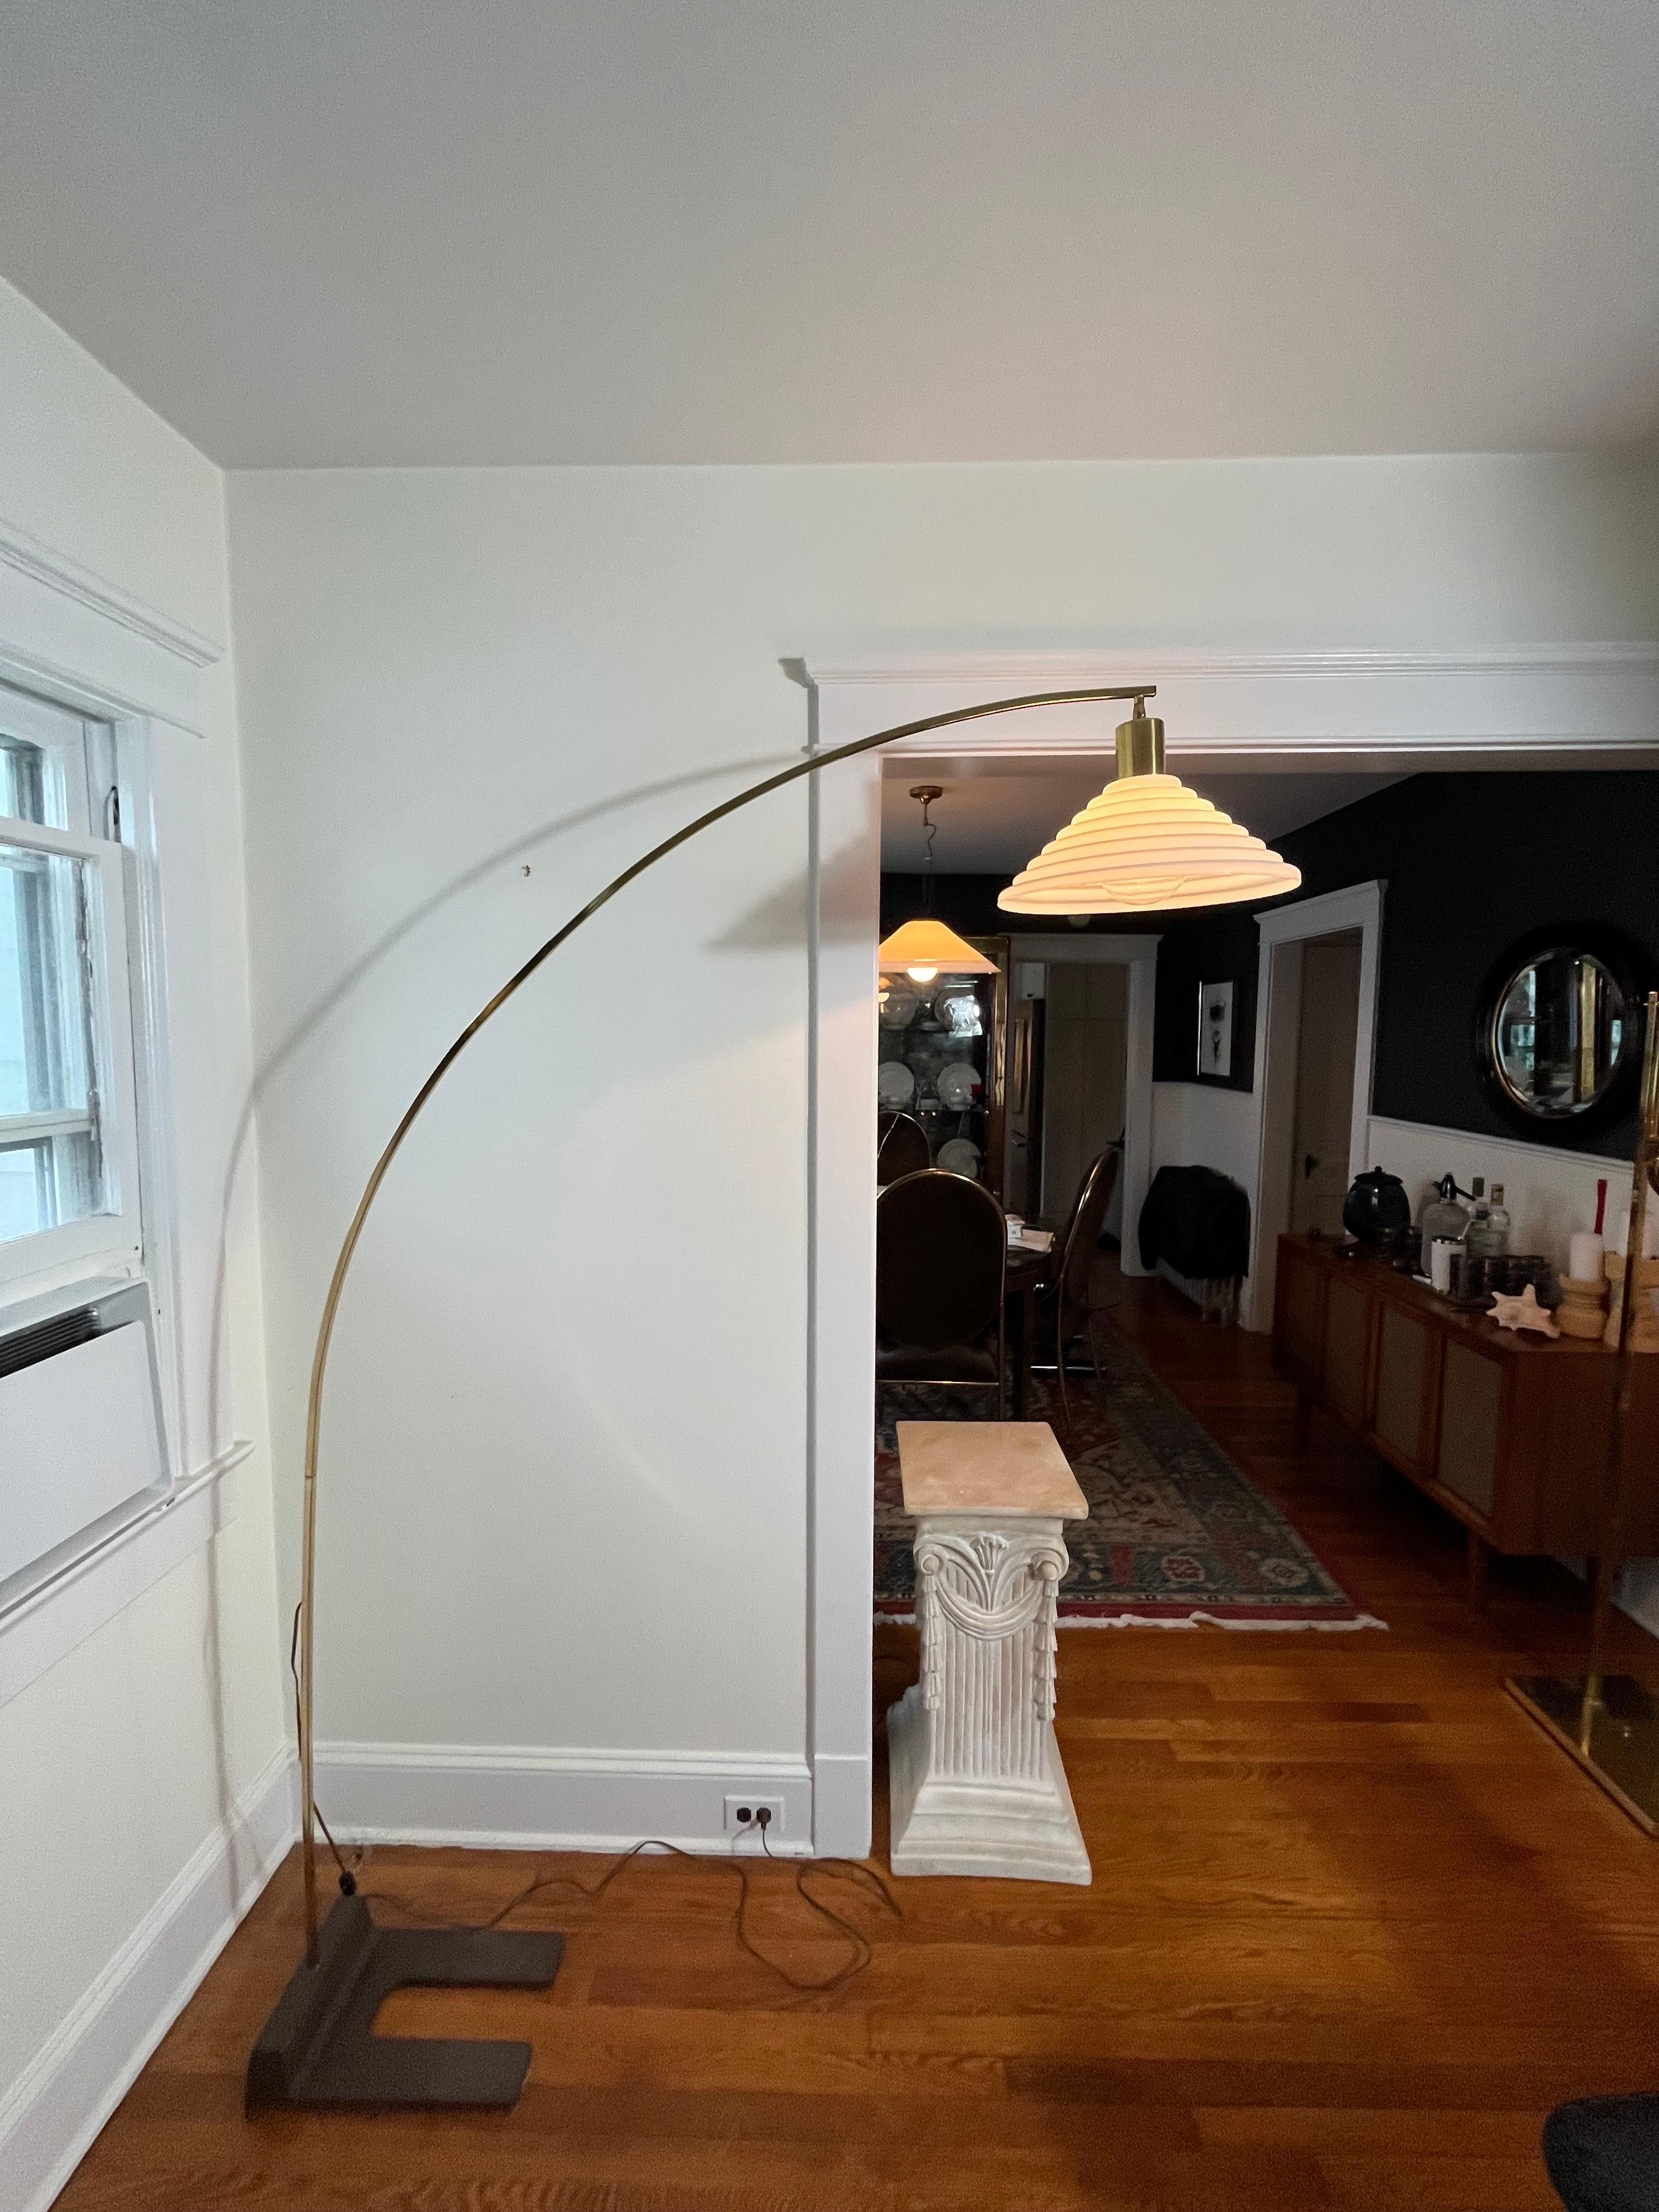 Classic simplicity in this brass arc floor lamp. Stepped pagoda style glass shade in the style of Guzzini. Square tubular frame disassembles into 3 pieces for ease in movement. Heavy iron horseshoe base.